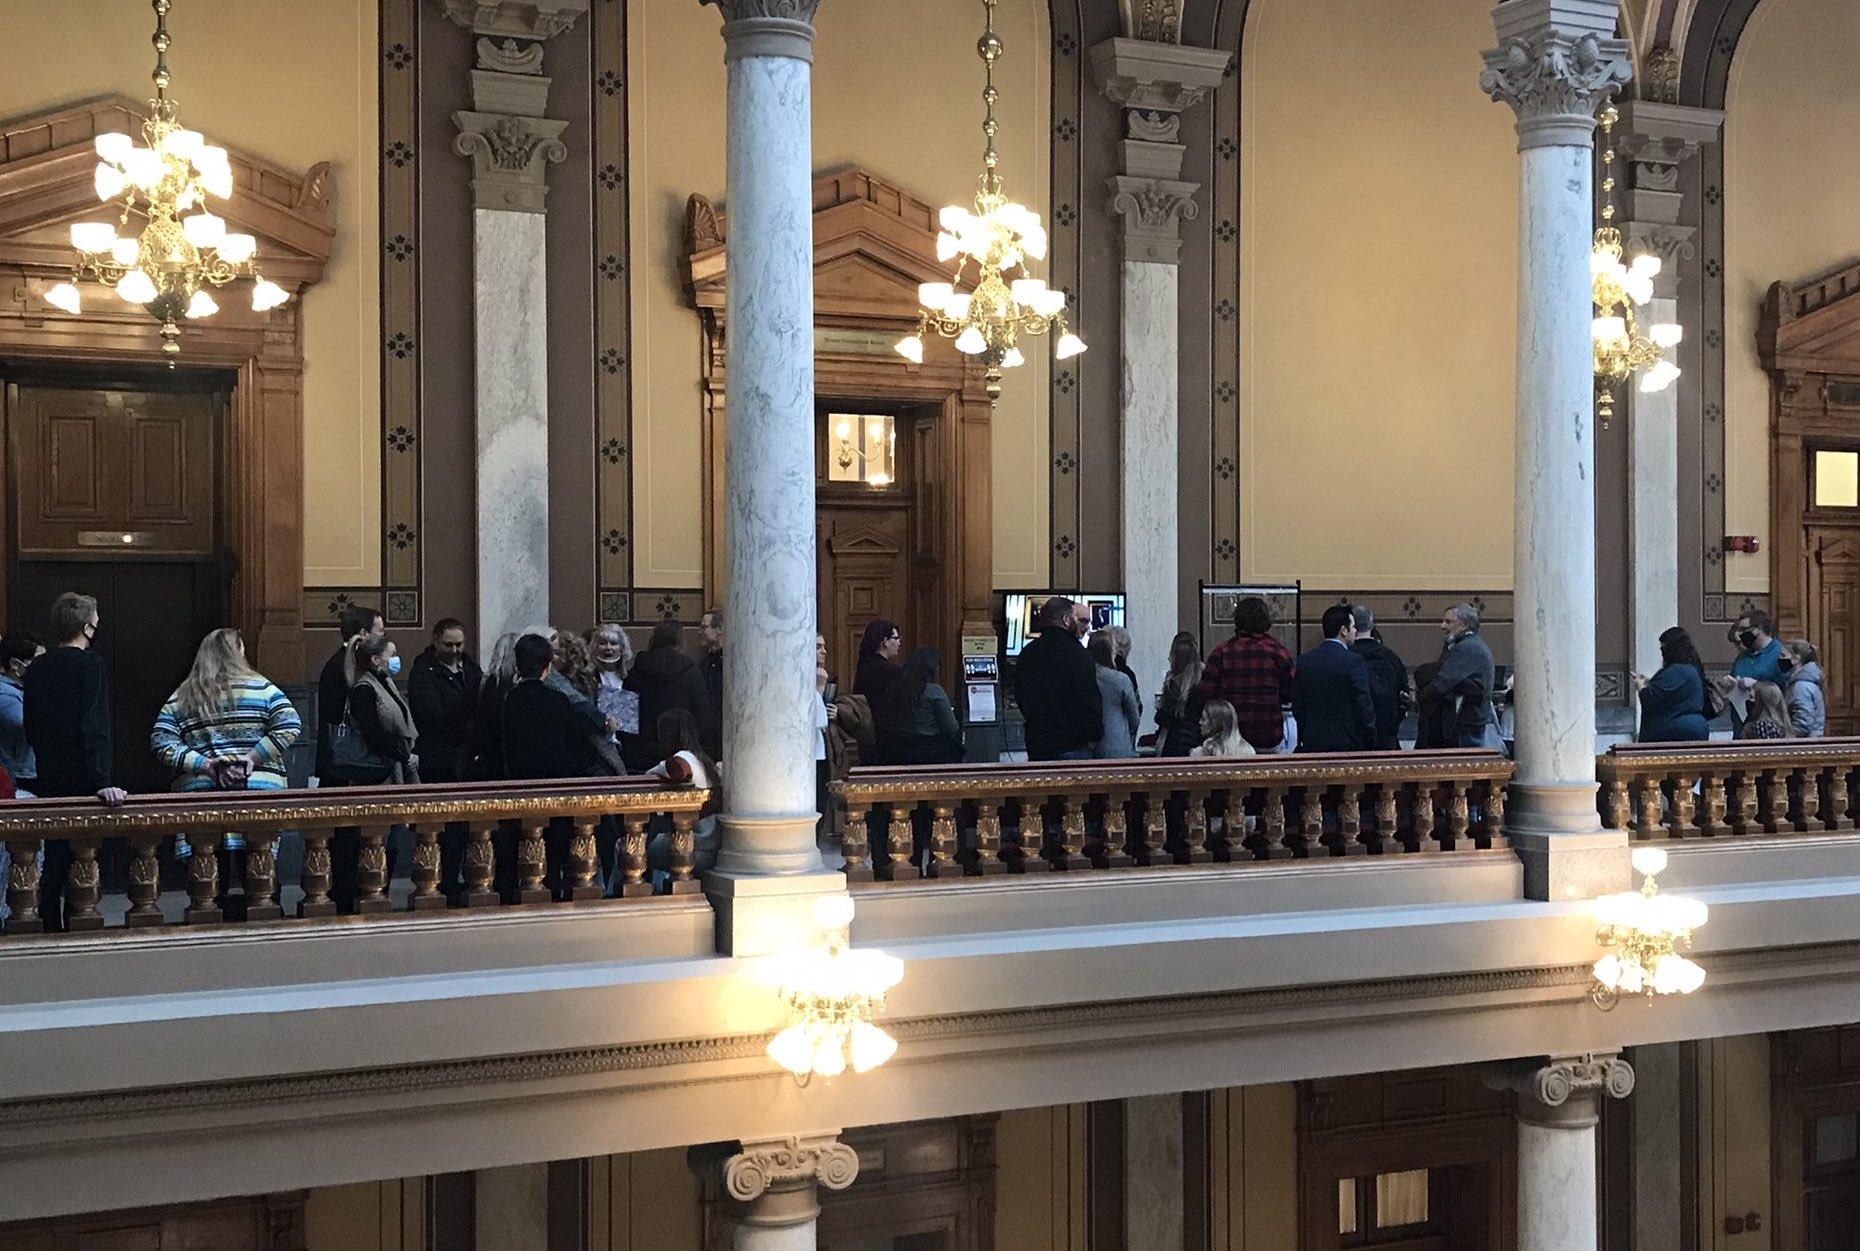 Many in the crowd waiting to testify on Senate Bill 74 did not wear masks, despite Statehouse policies. Courtesy of Taylor Hughes.